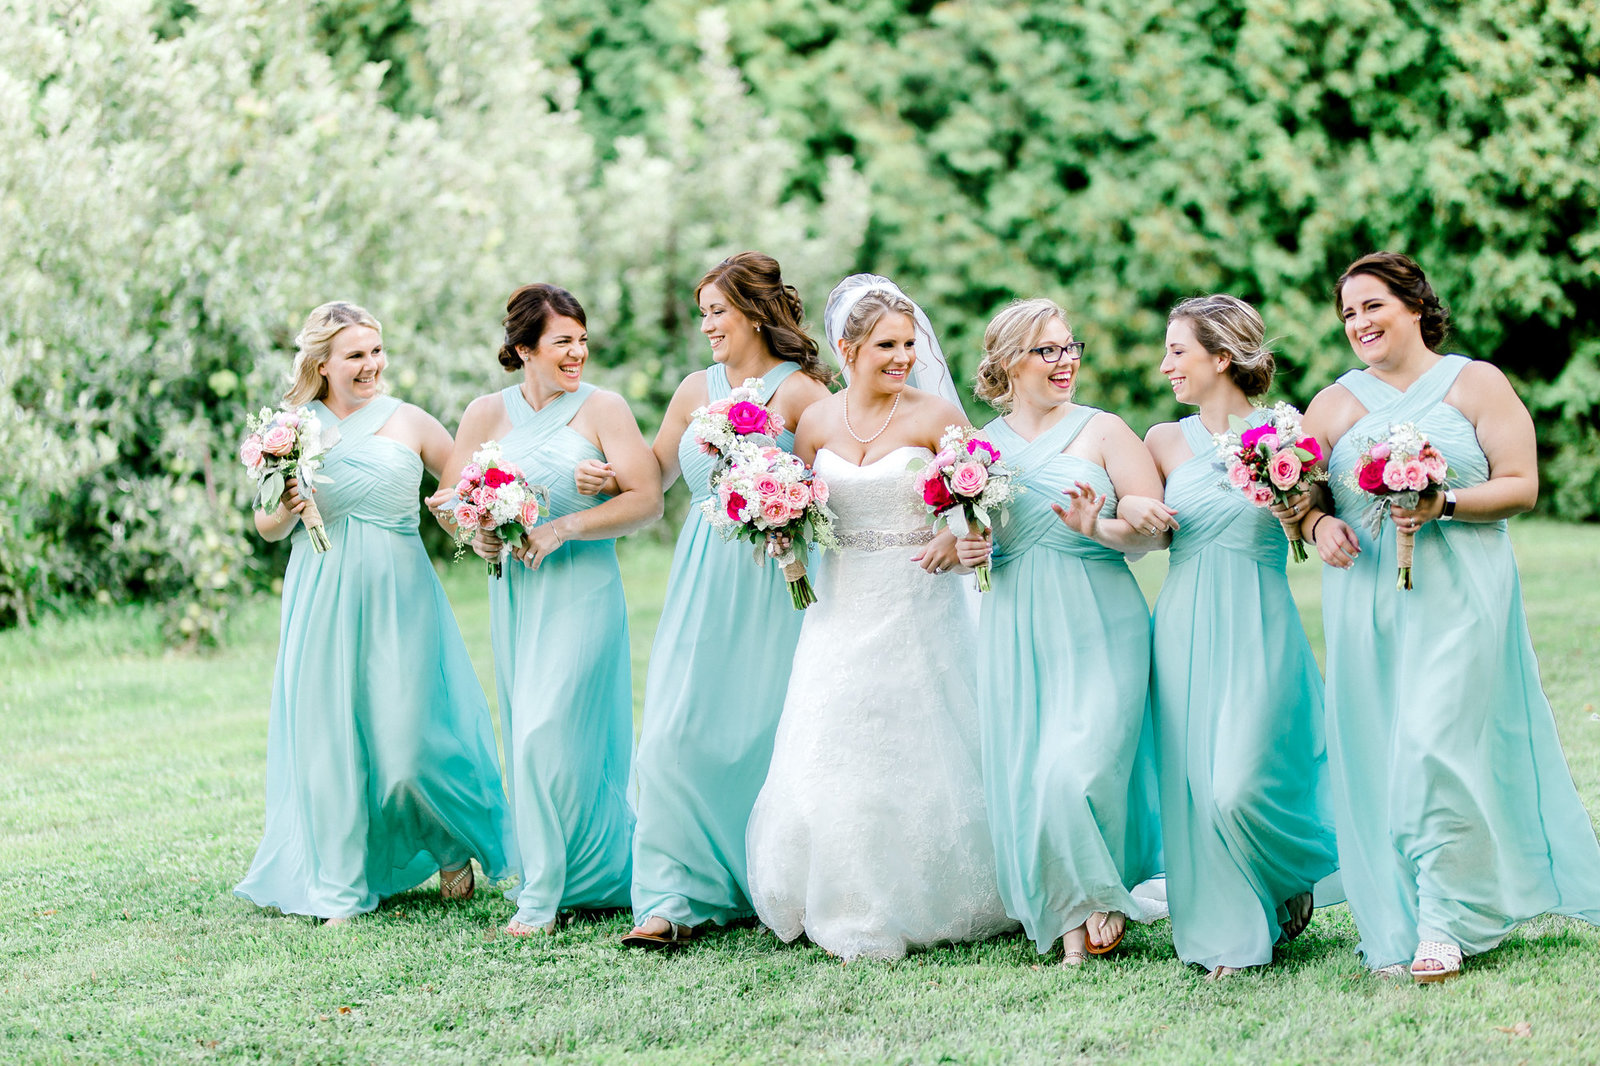 bridal cheer bridesmaids walking together wedding photography by local chicago wedding photographer bozena voytko, wedding photographers, best chicago wedding photographer, chicago Il wedding photographer